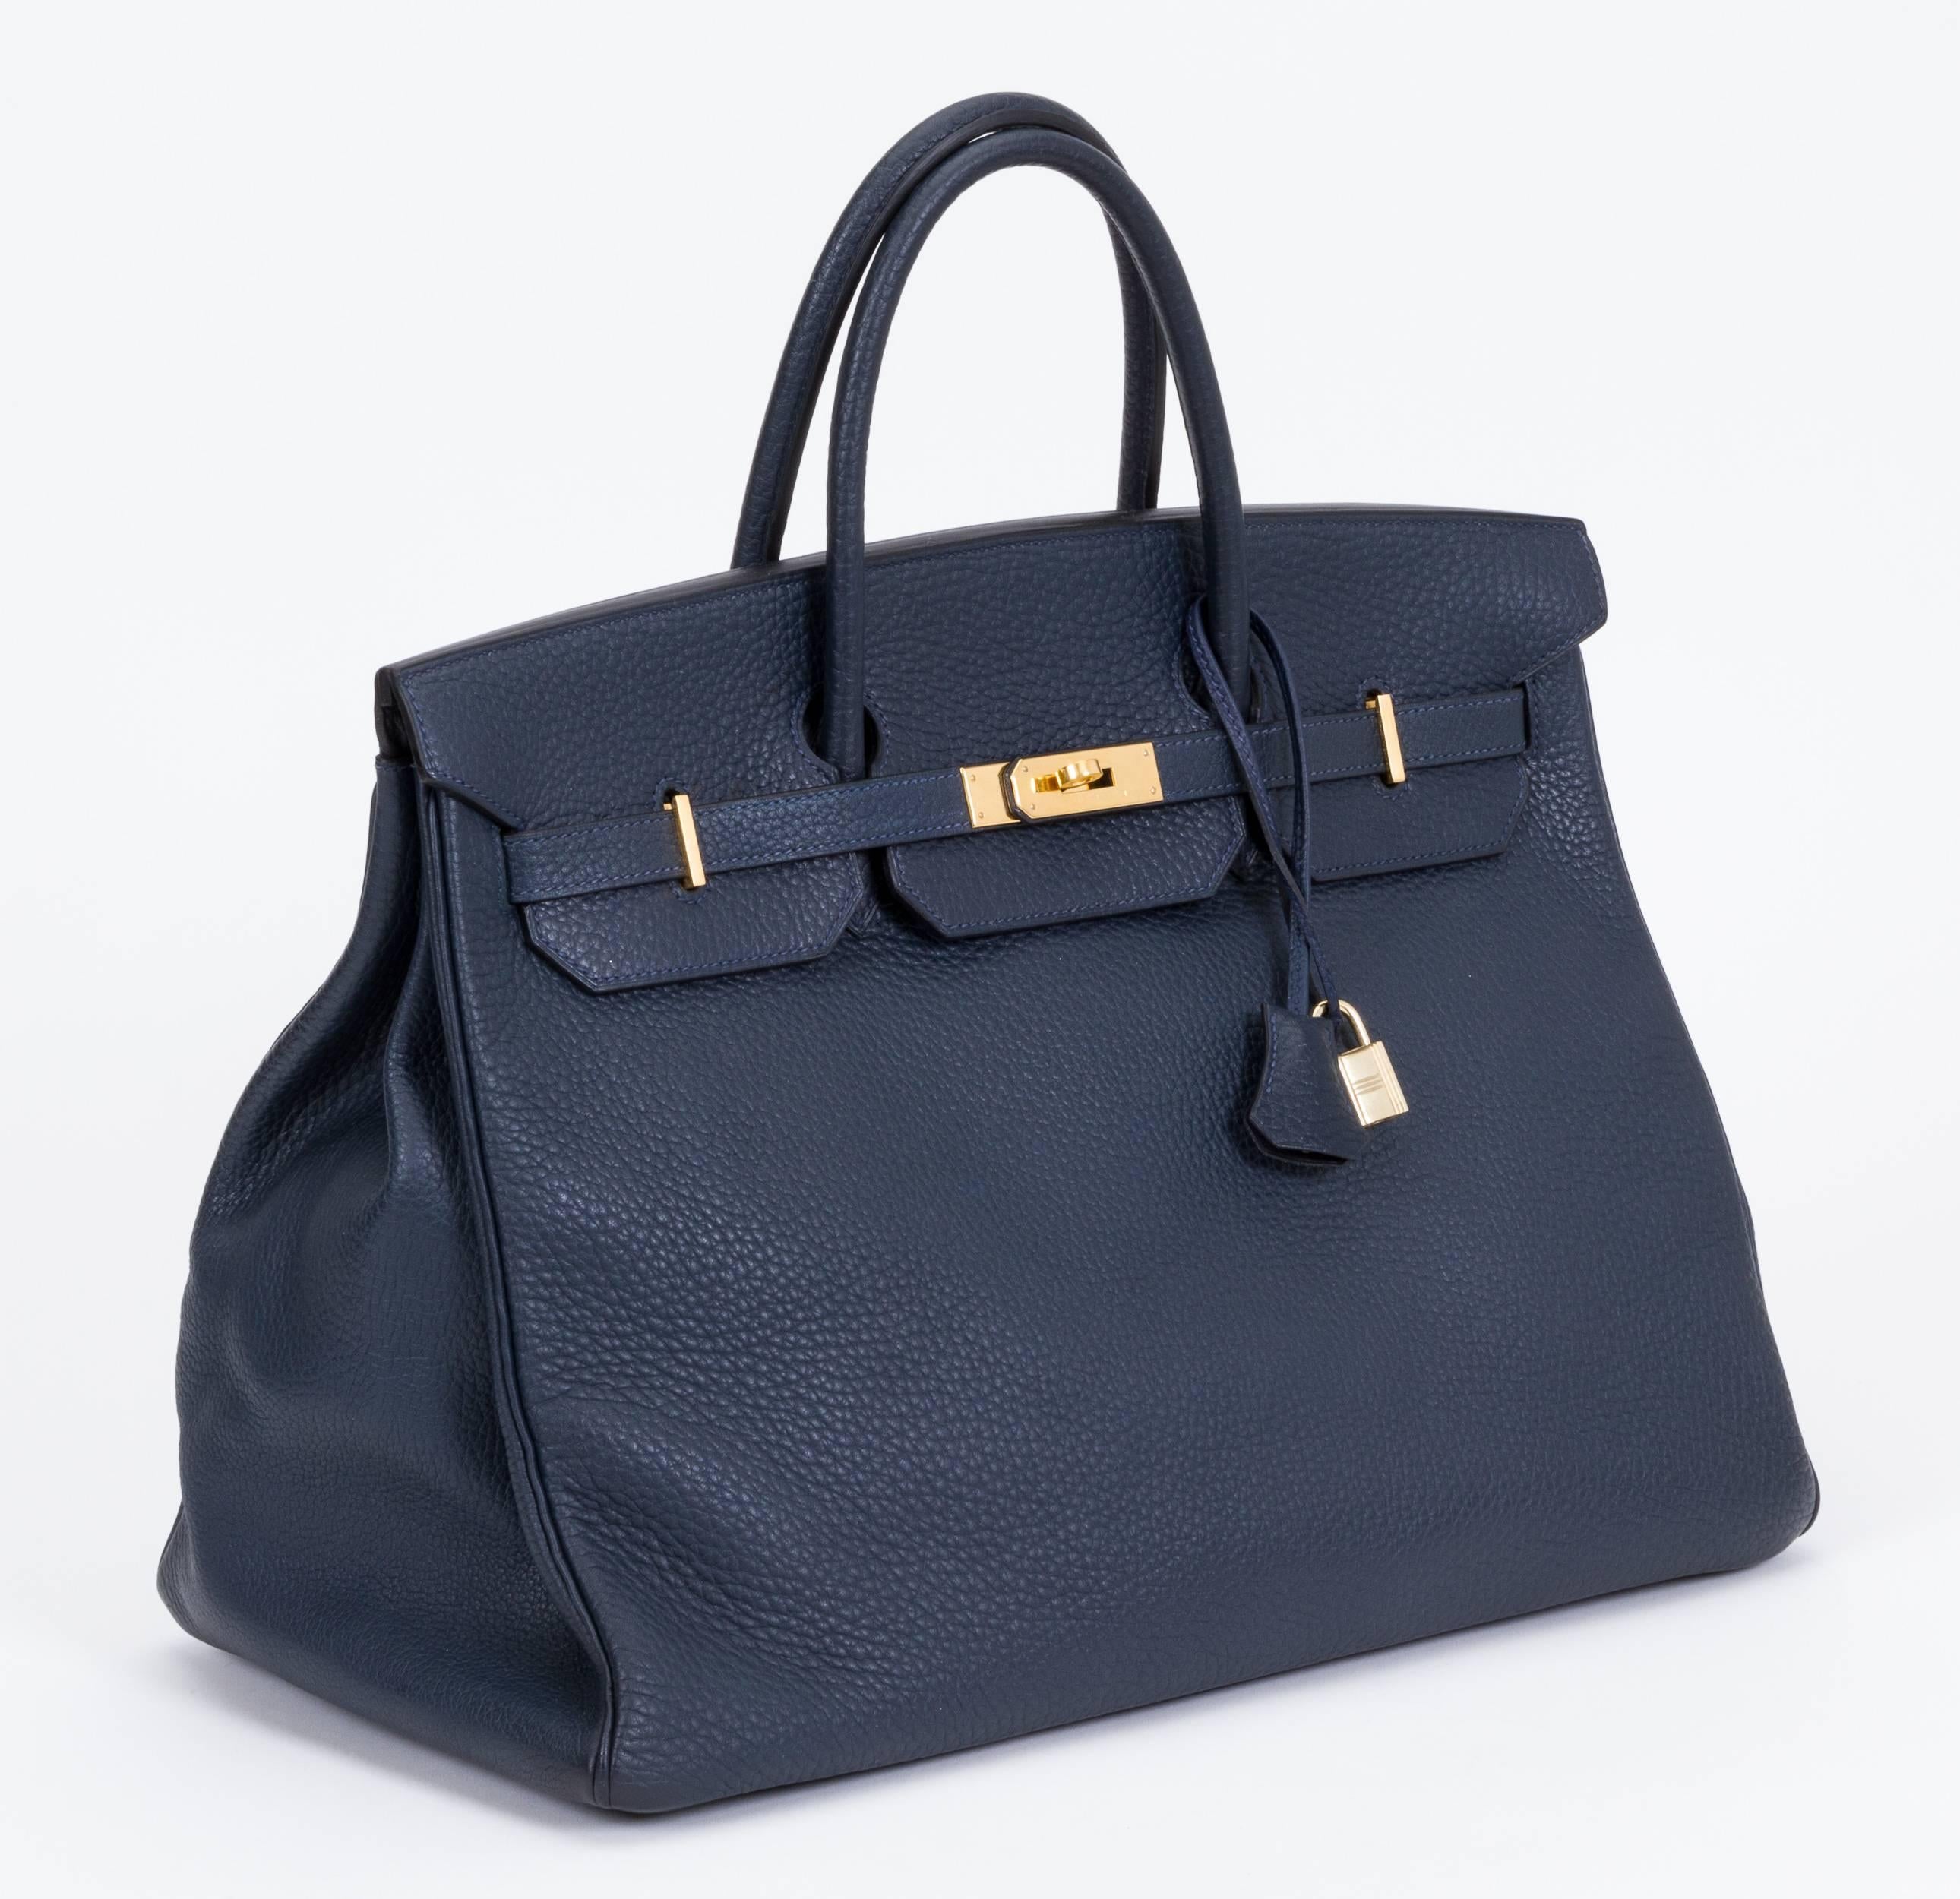 Hermès Birkin 40cm navy togo leather and gold tone hardware. Dated V for 1992.Handle drop 5.5